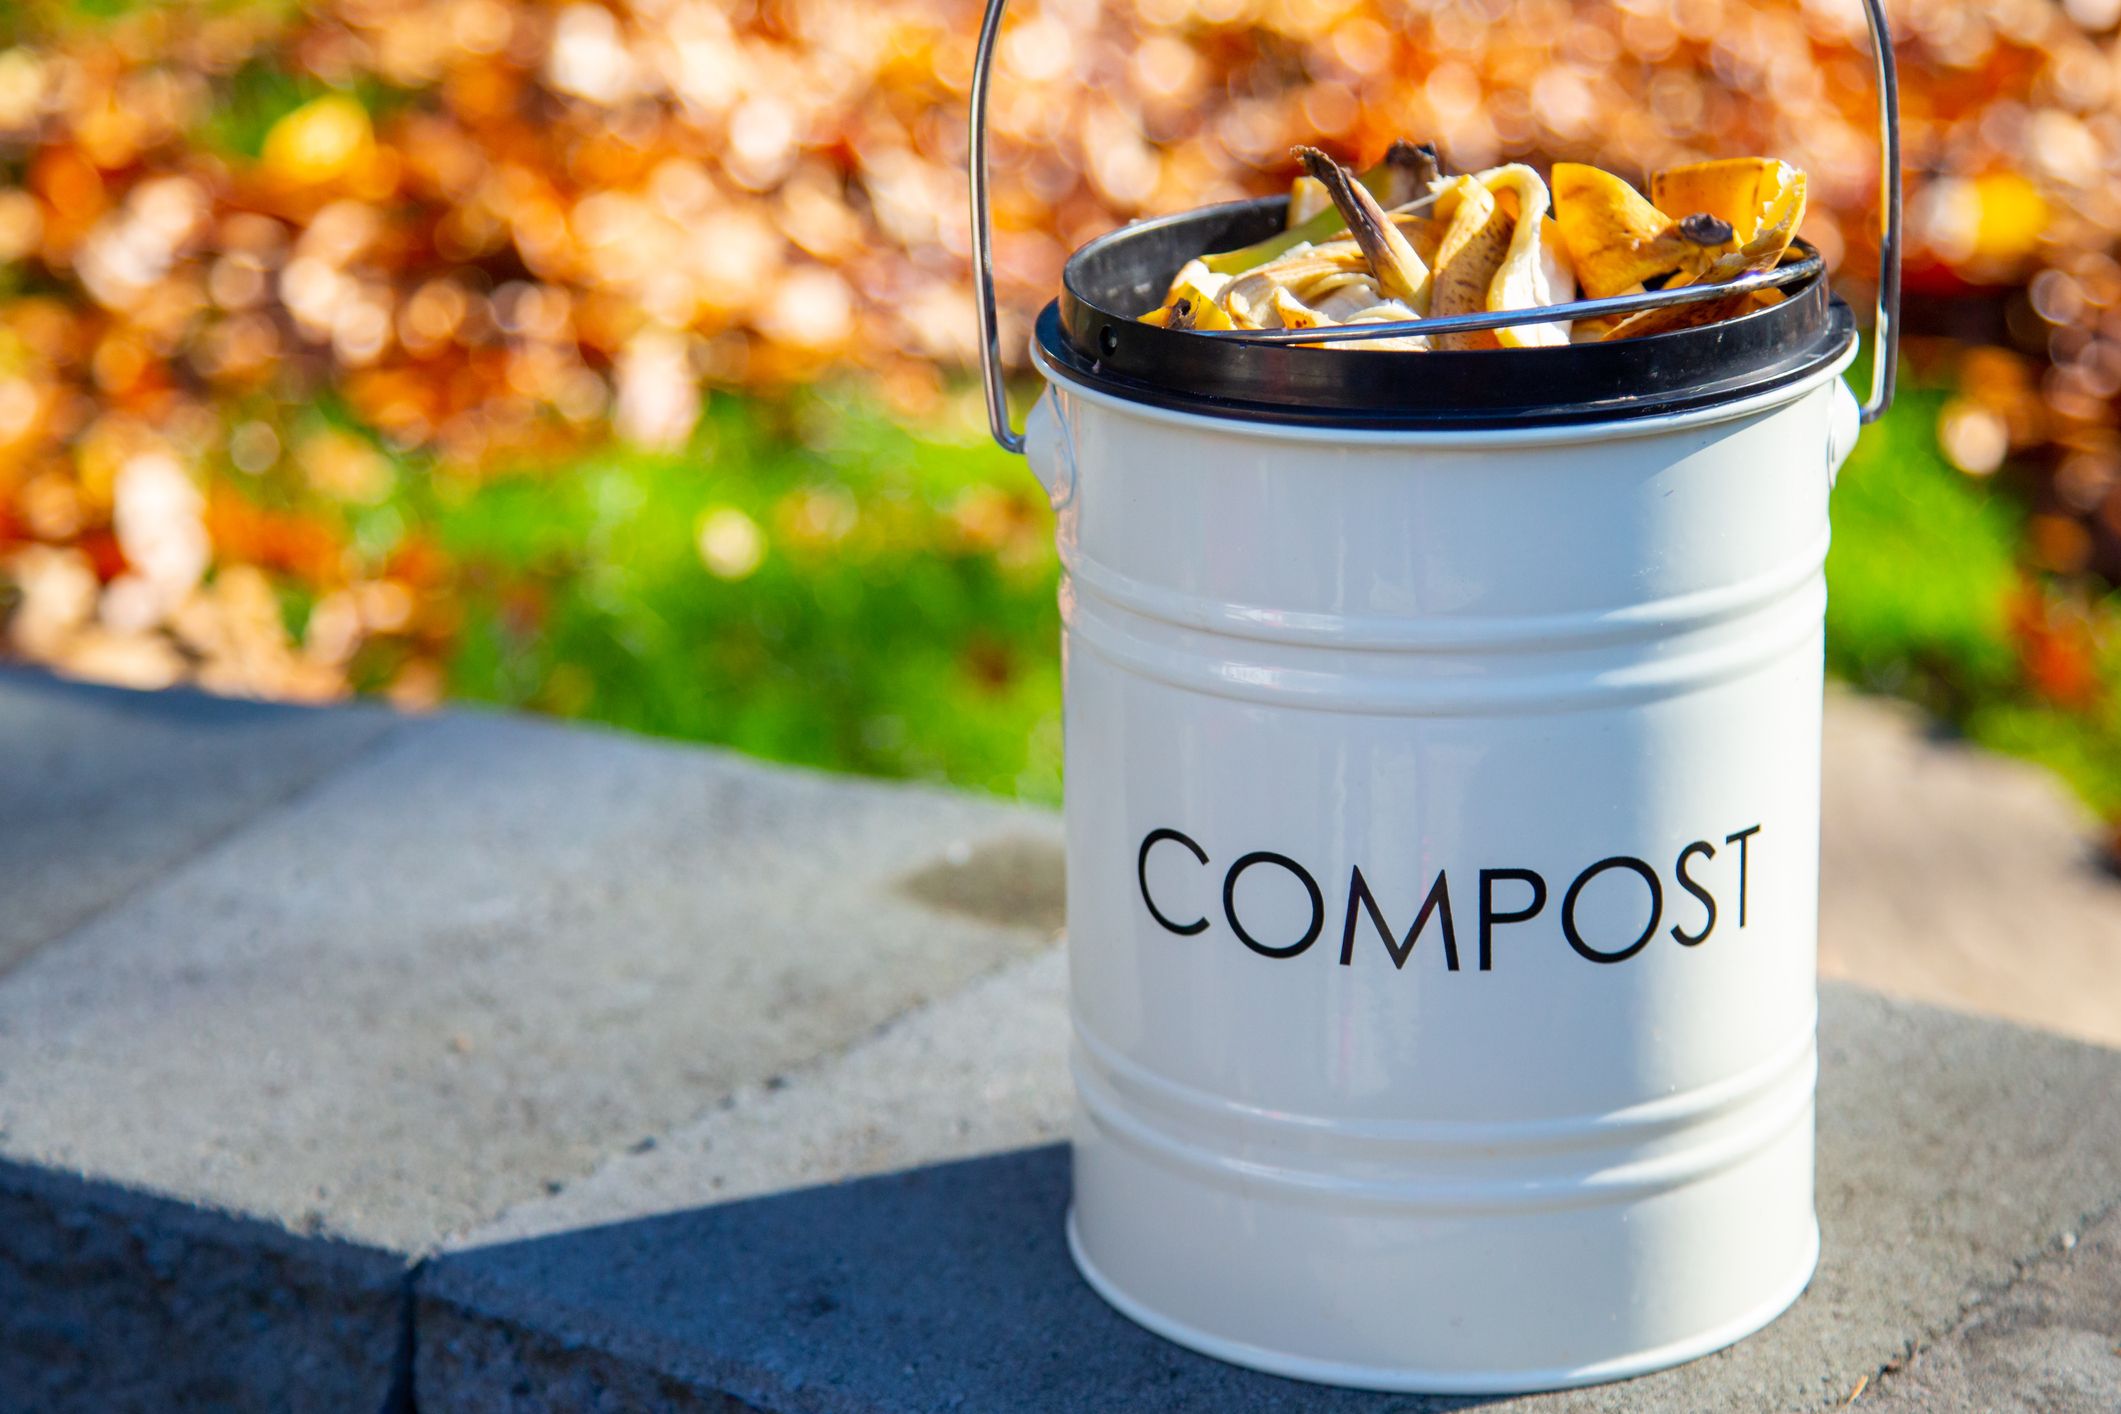 https://hips.hearstapps.com/hmg-prod/images/compost-bin-outside-on-top-of-wall-royalty-free-image-1573864348.jpg